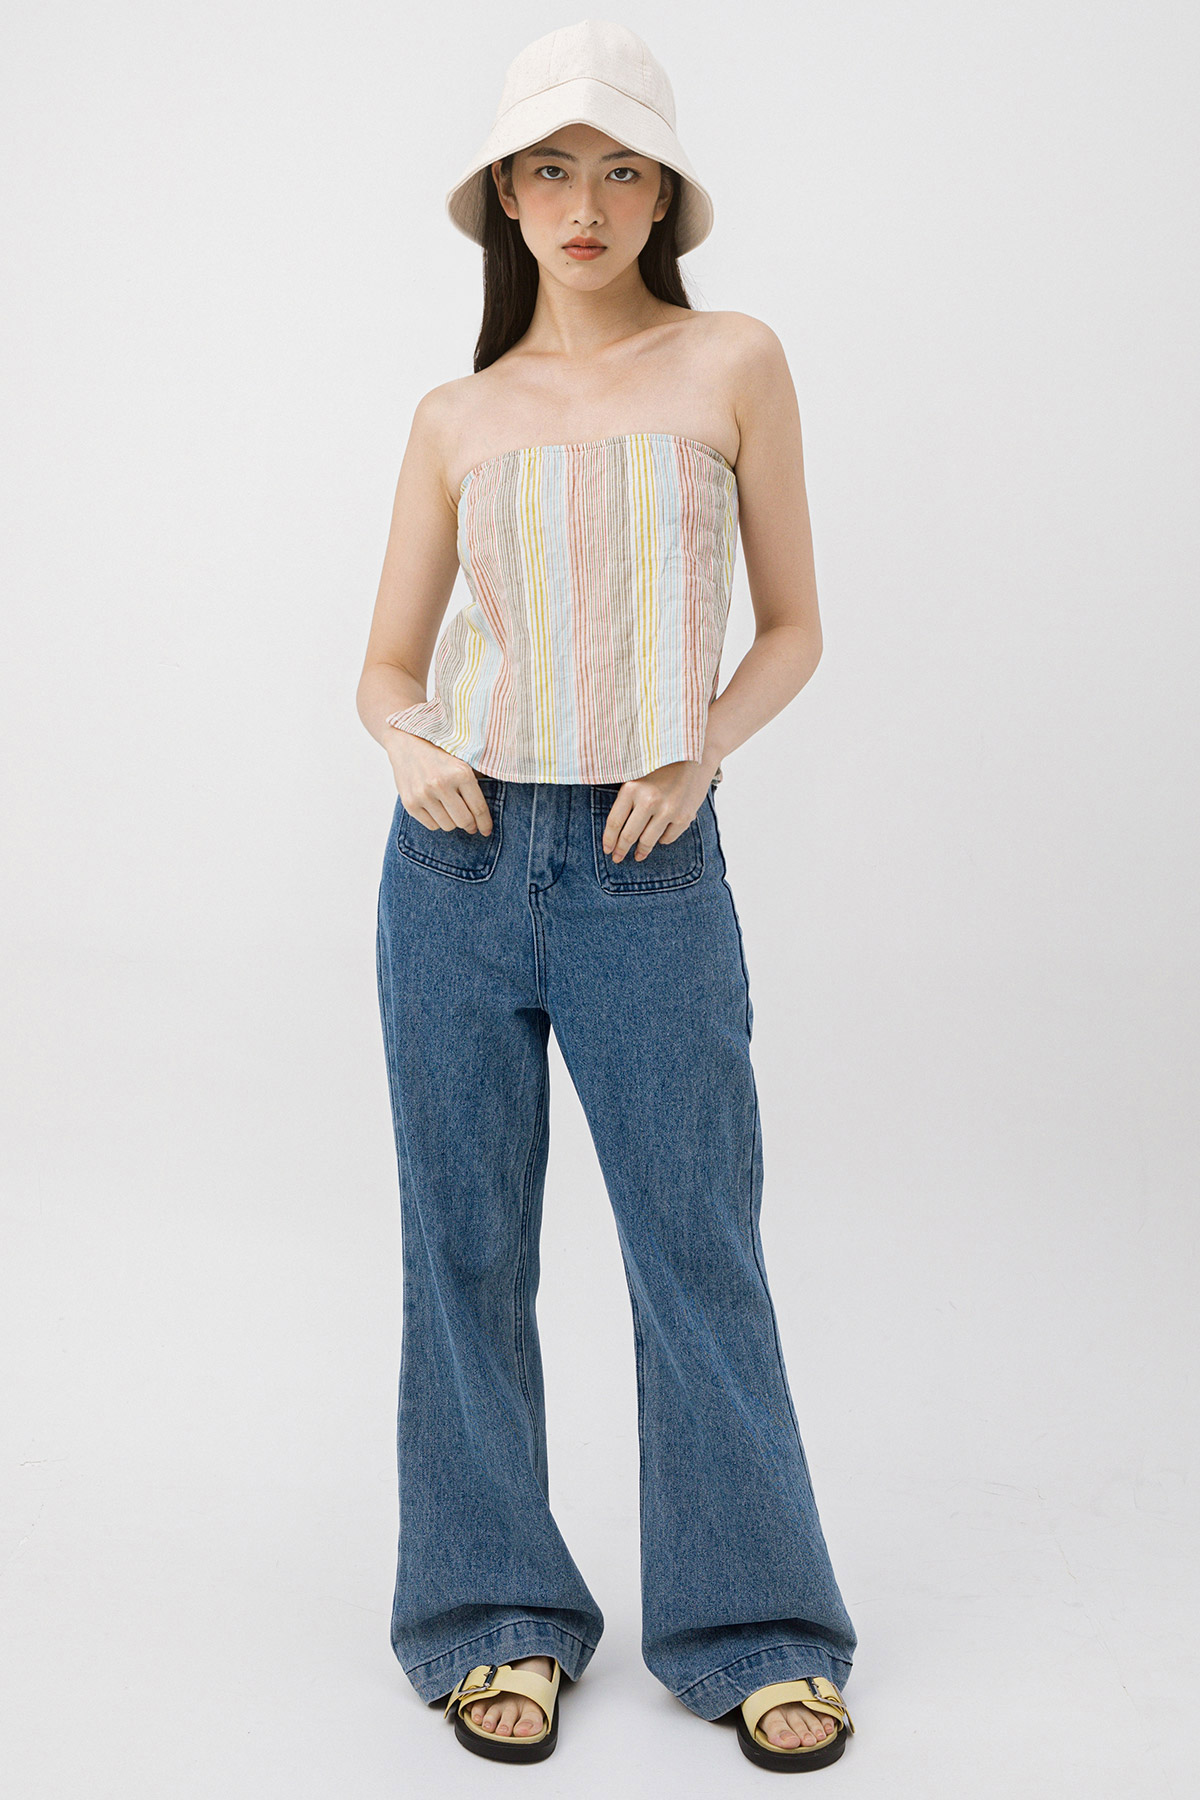 *SALE* SONIA TOP - SOUTHERN FRANCE [BY MODPARADE]